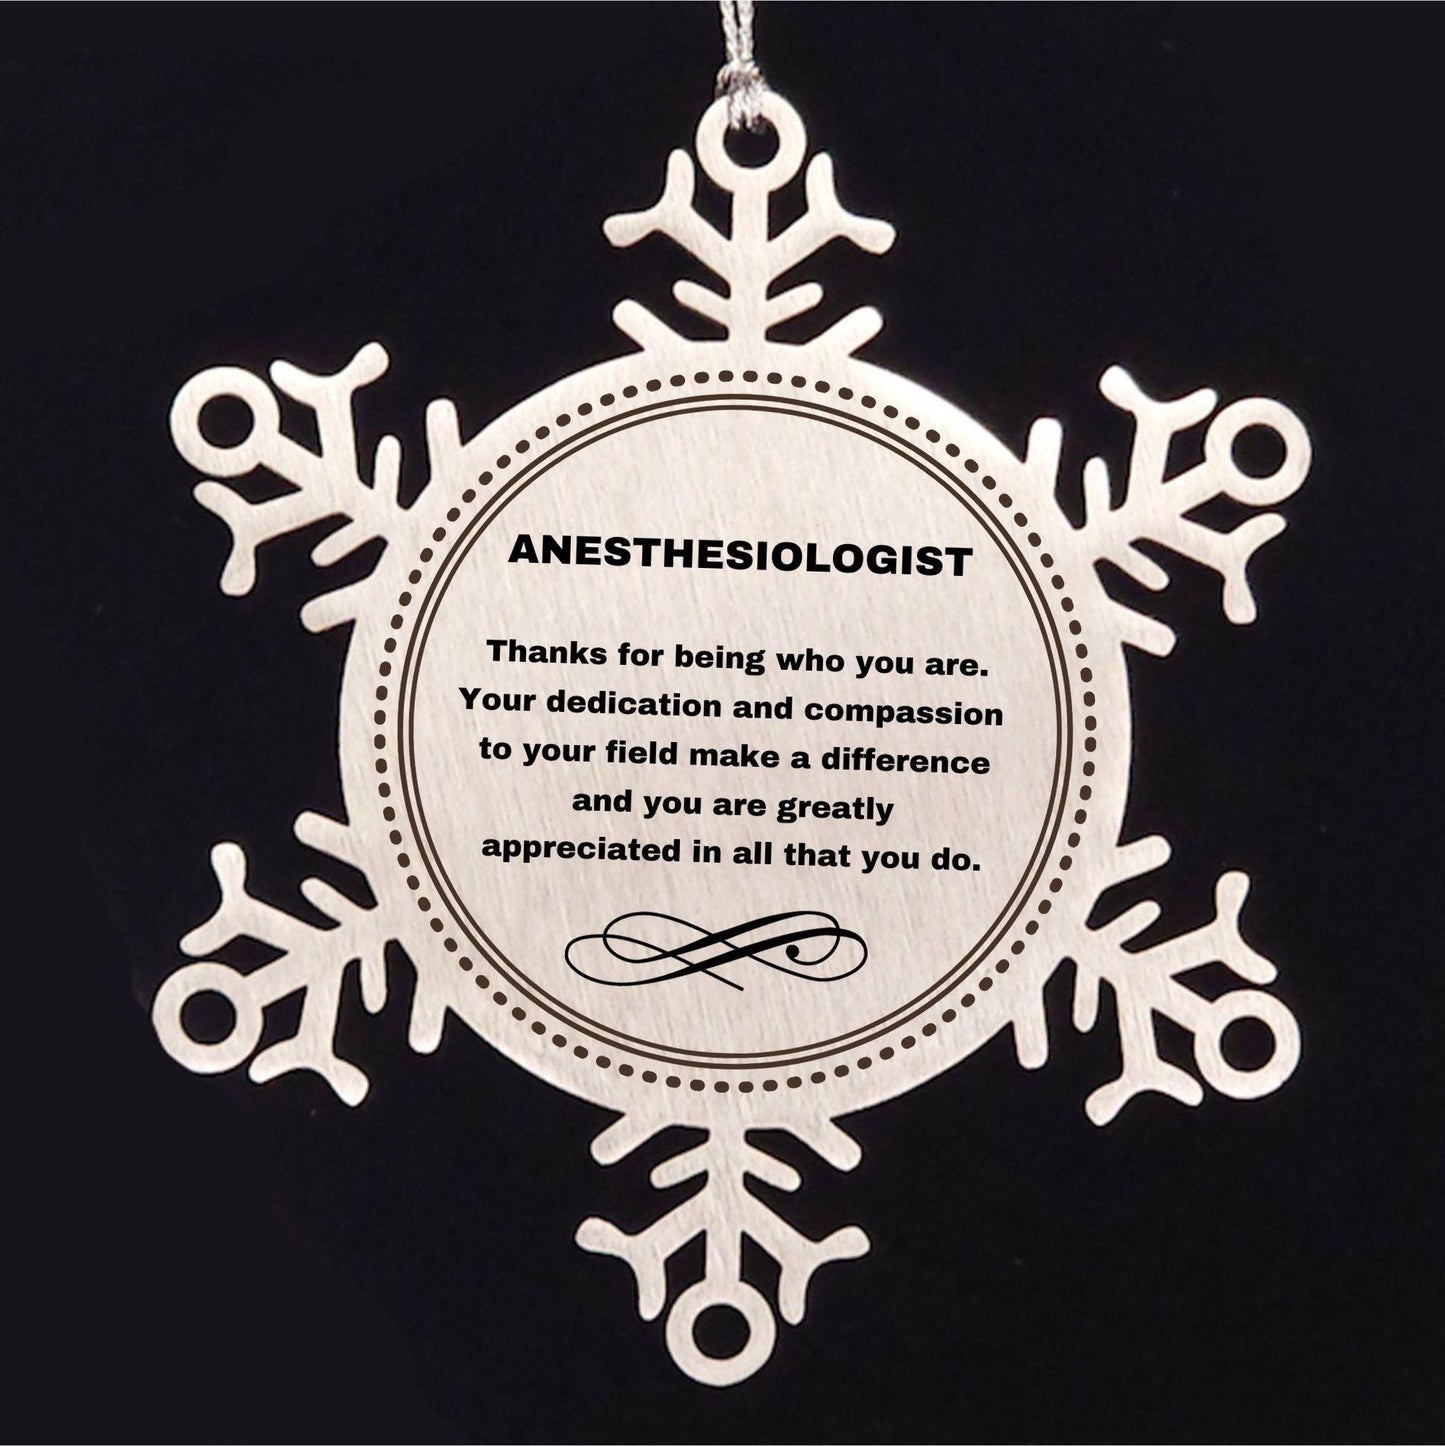 Anesthesiologist Snowflake Ornament - Thanks for being who you are - Birthday Christmas Tree Gifts Coworkers Colleague Boss - Mallard Moon Gift Shop